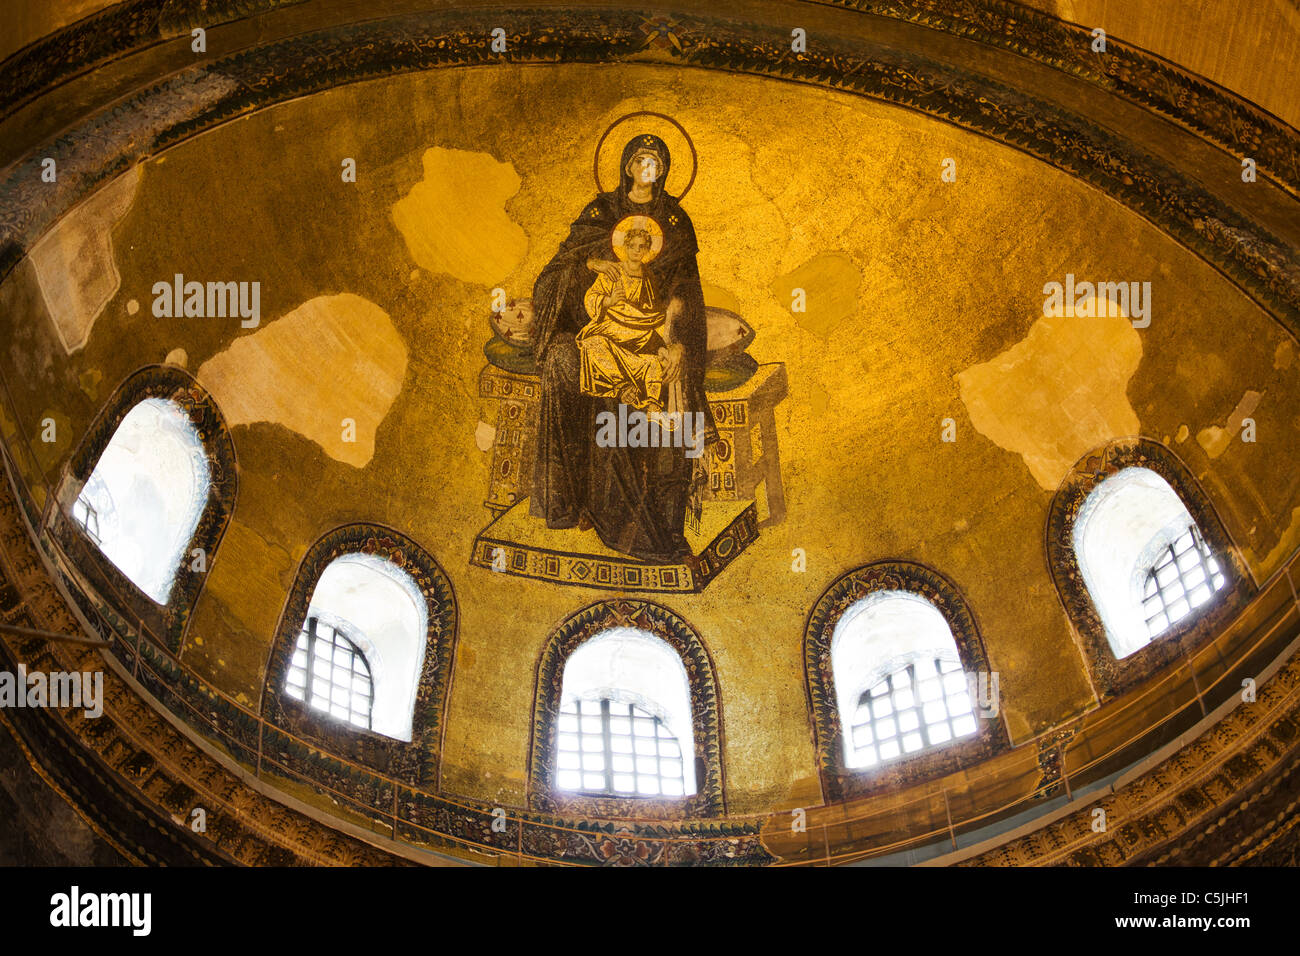 Blessed Virgin Mary with baby Jesus Byzantine mosaic art on the Hagia Sophia apse in Istanbul, Turkey. Stock Photo